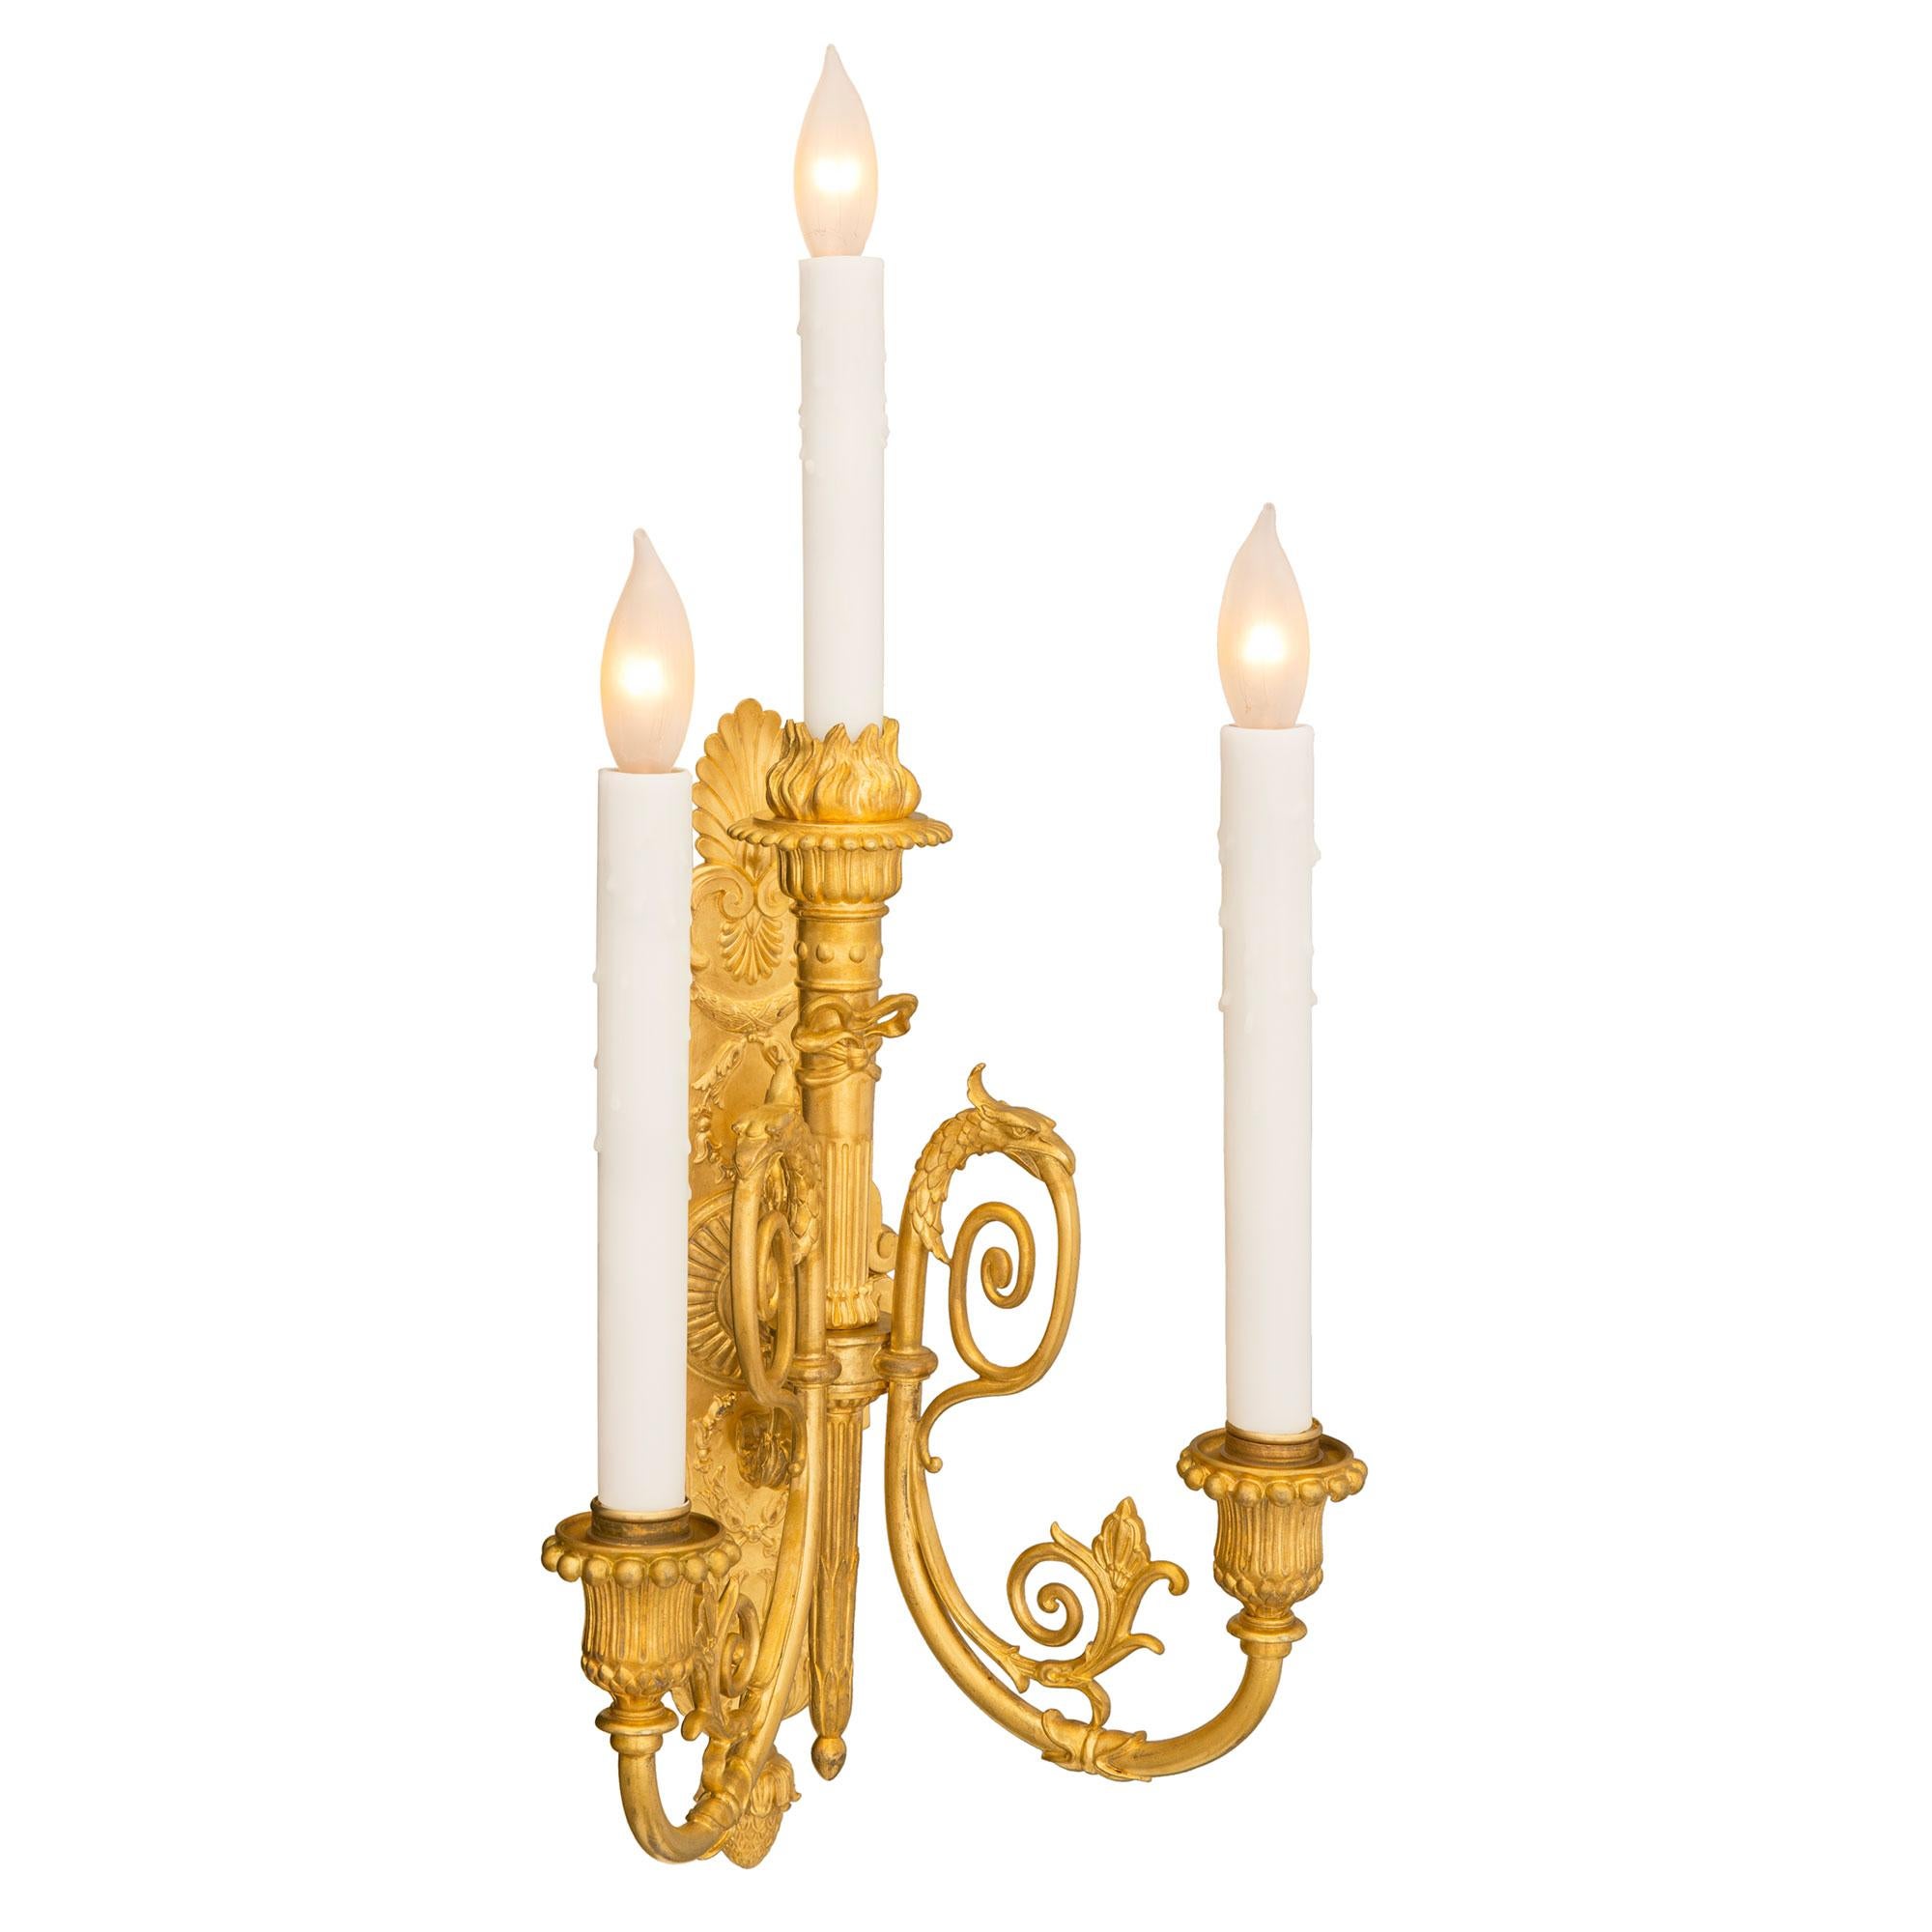 An elegant and high quality pair of French 19th century Neo-Classical st. ormolu sconces, signed F. Barbedienne. Each three arm sconce is centered by a lovely bottom acorn finial below fine scrolled foliate designs at the back plate. The central